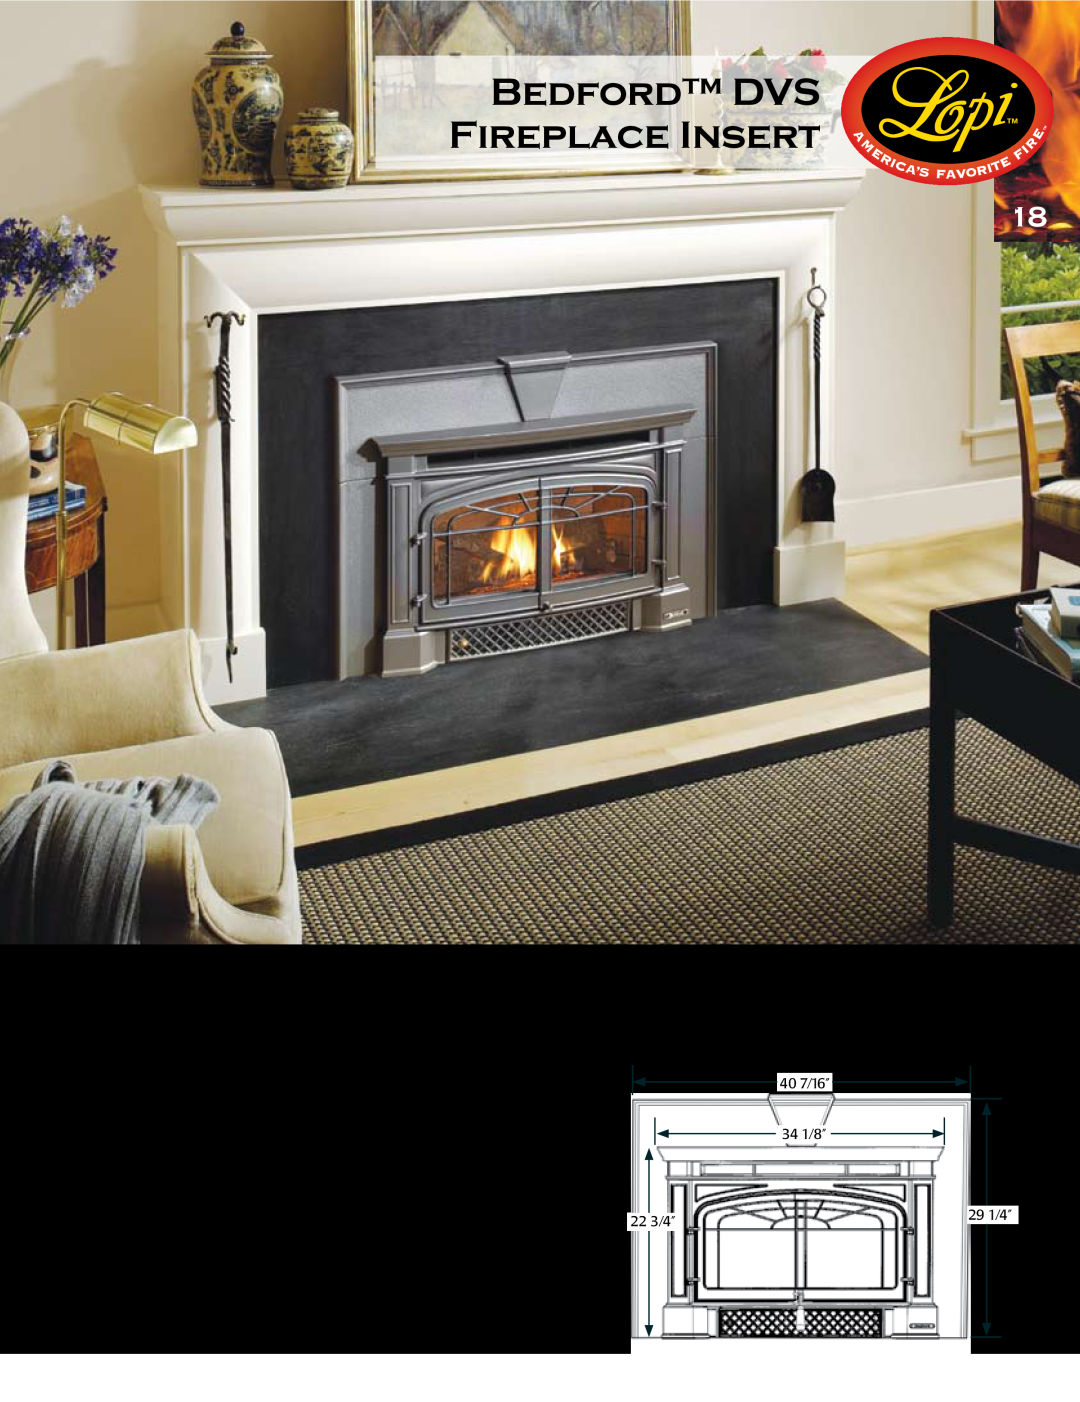 Lopi Gas Stove And Fireplace manual Bedford Dvs Fireplace Insert 